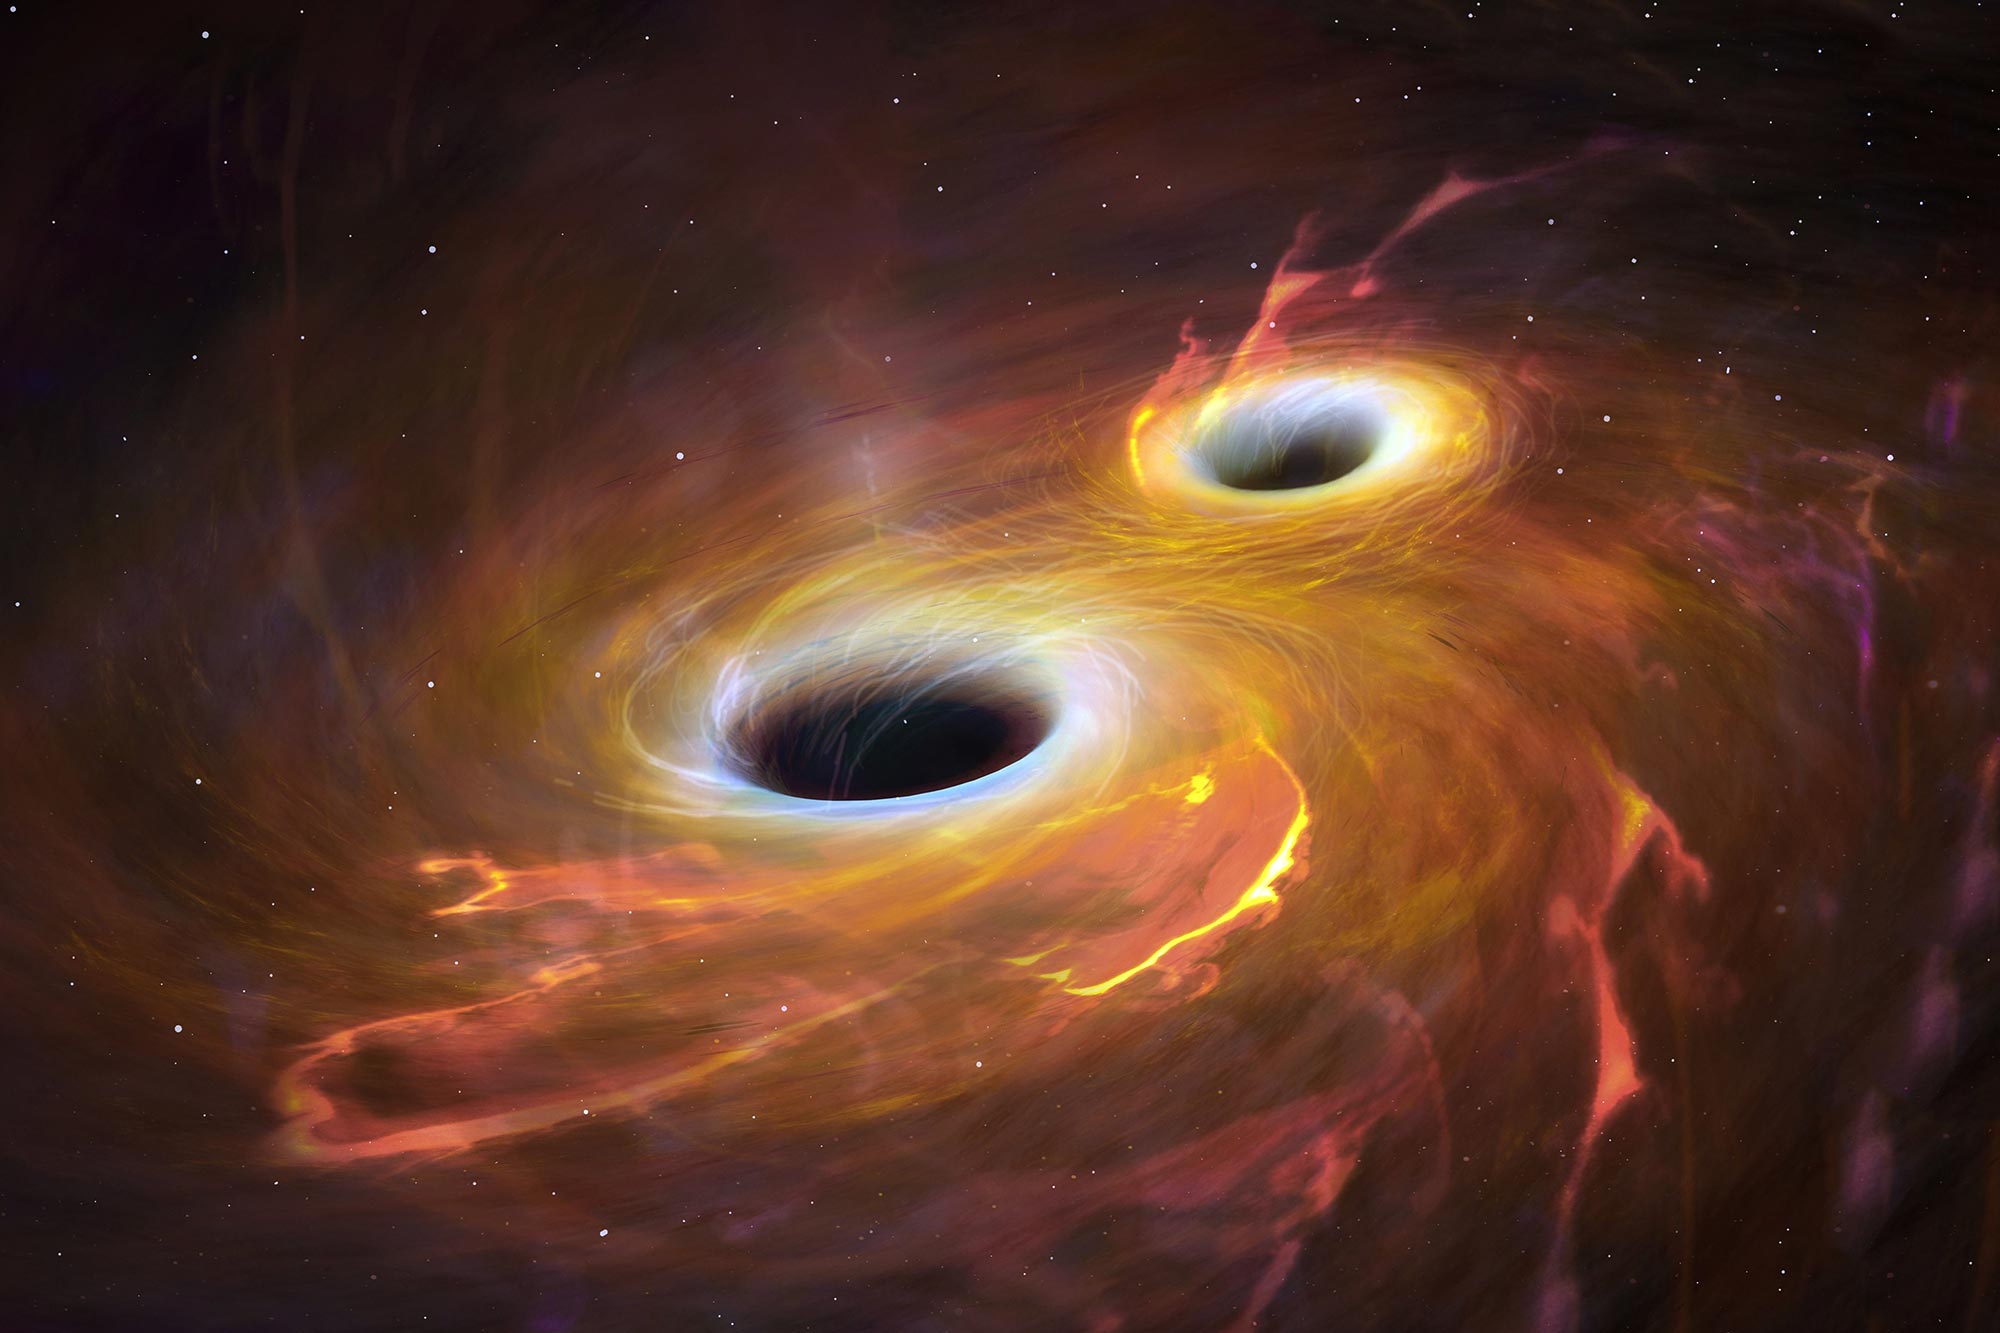 Two black holes collide